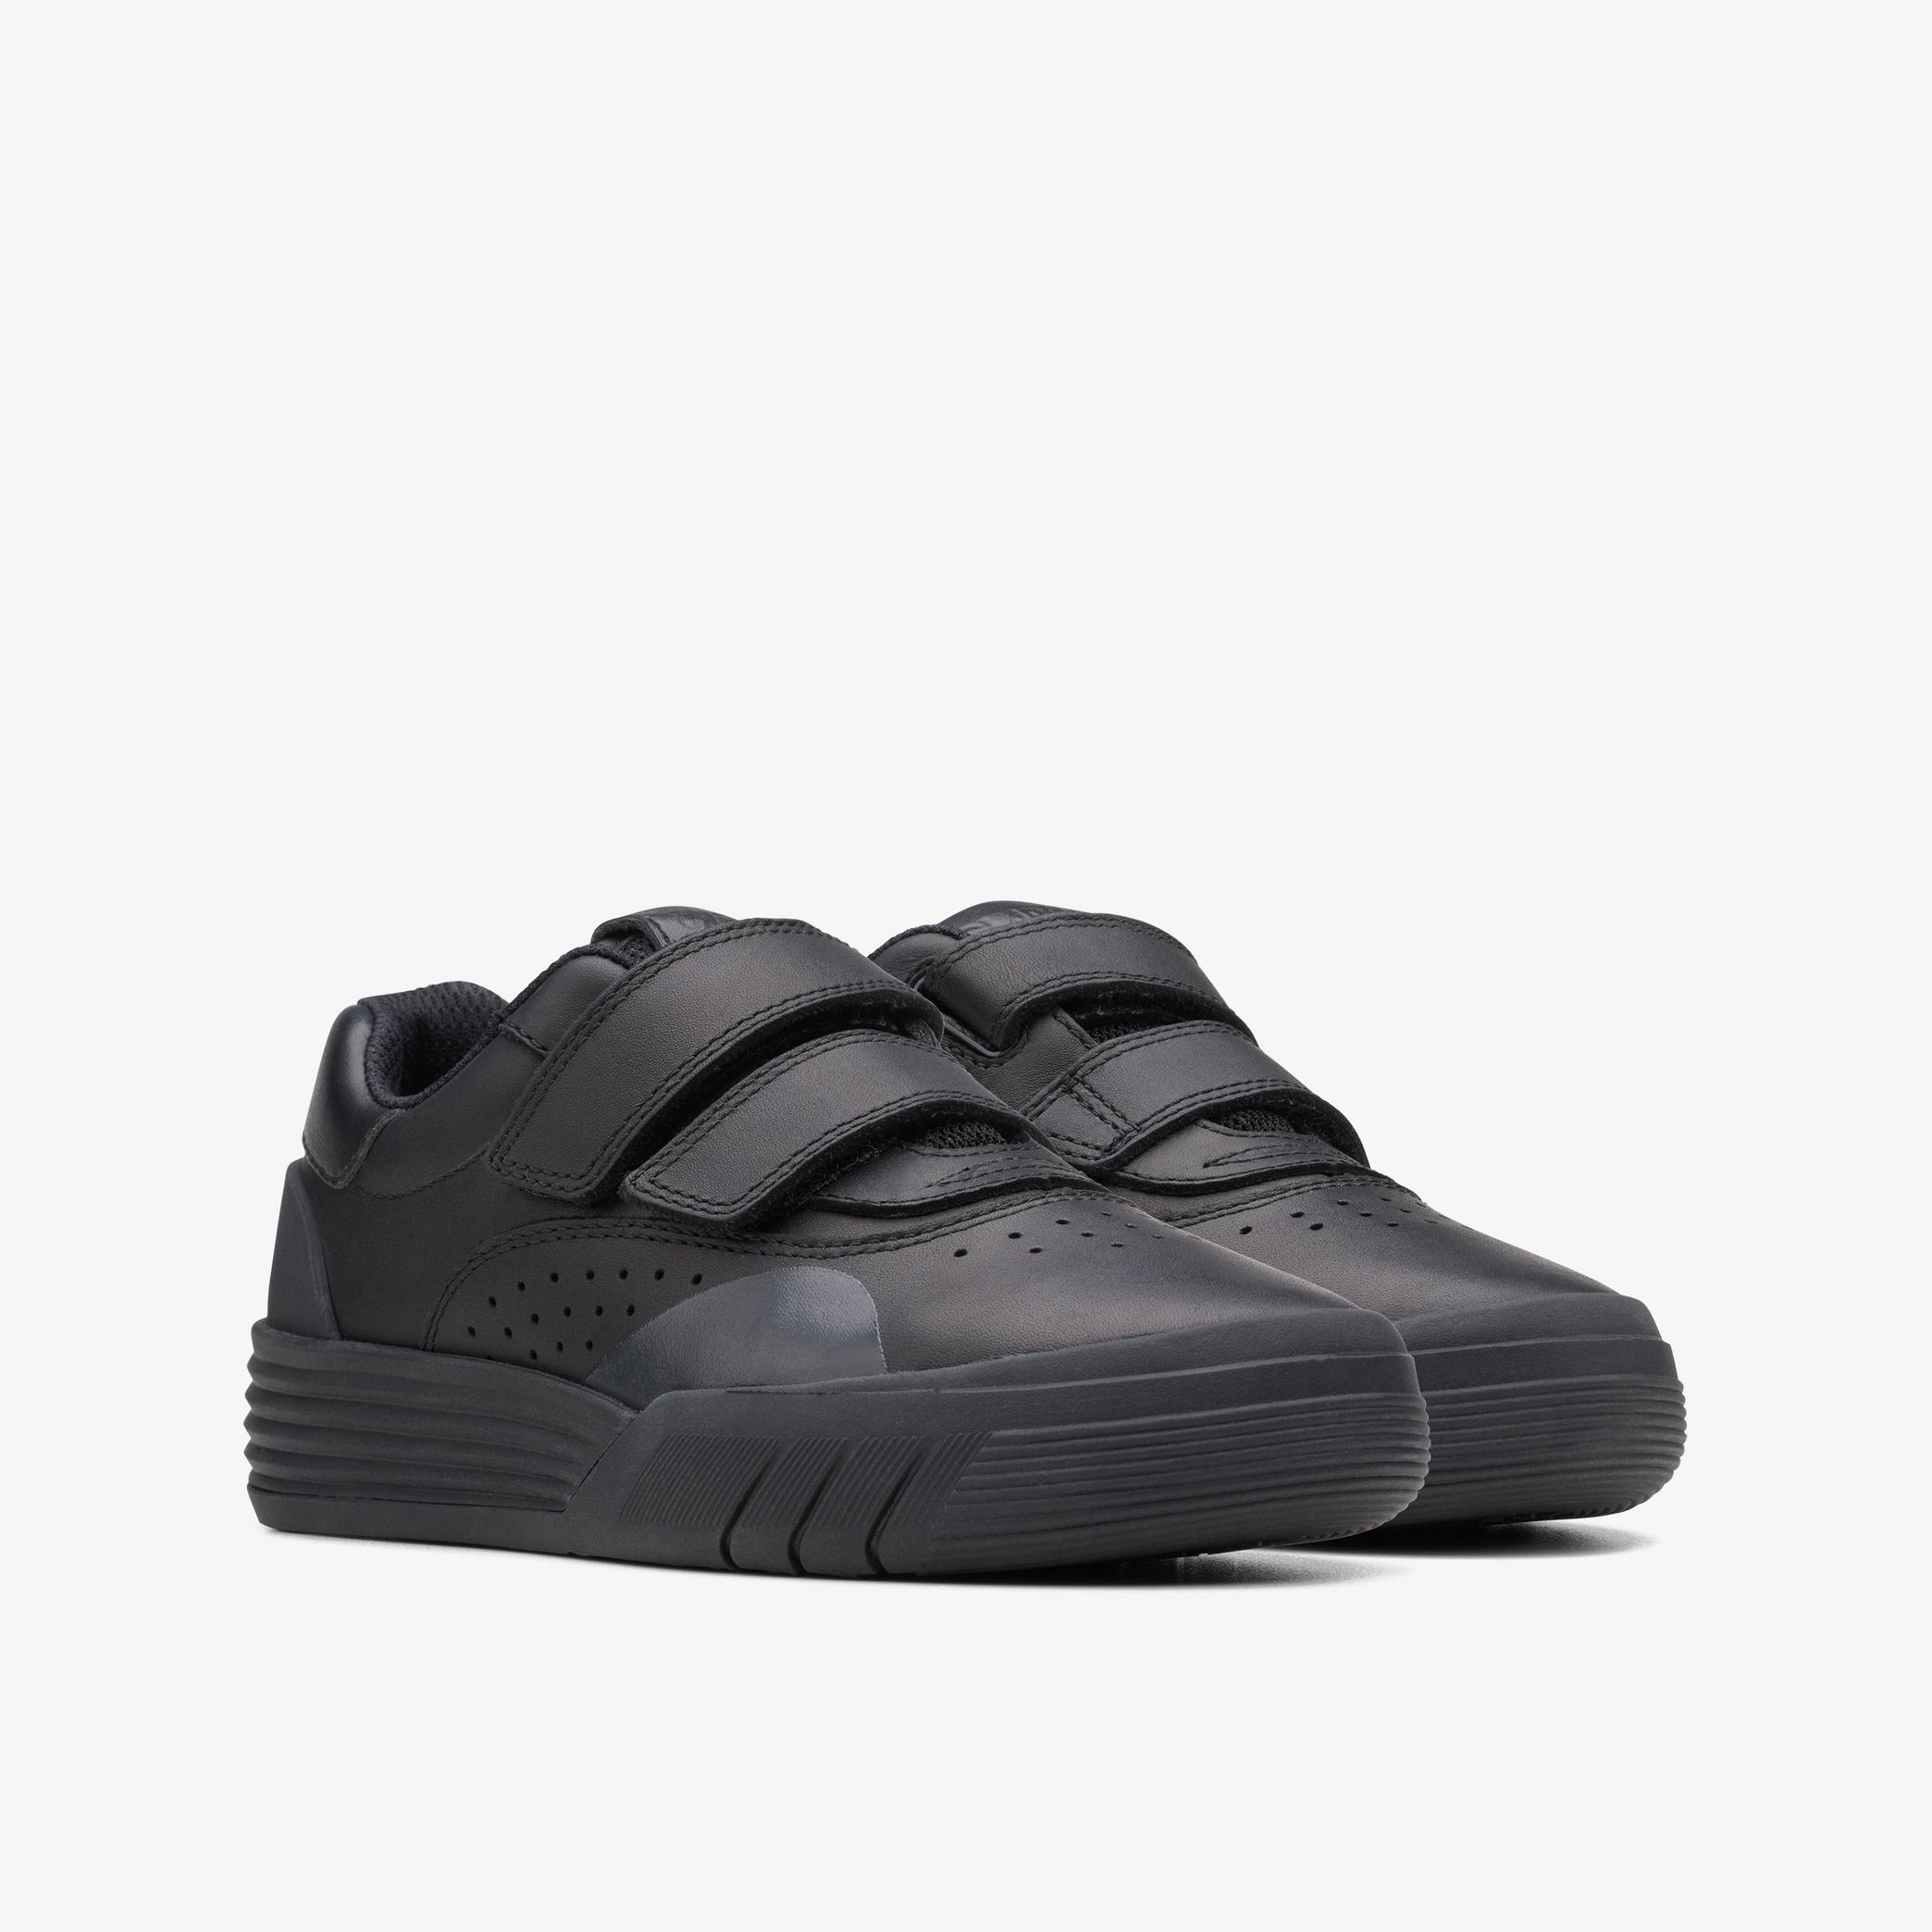 CICA Go Kid Black Leather Trainers, view 4 of 6